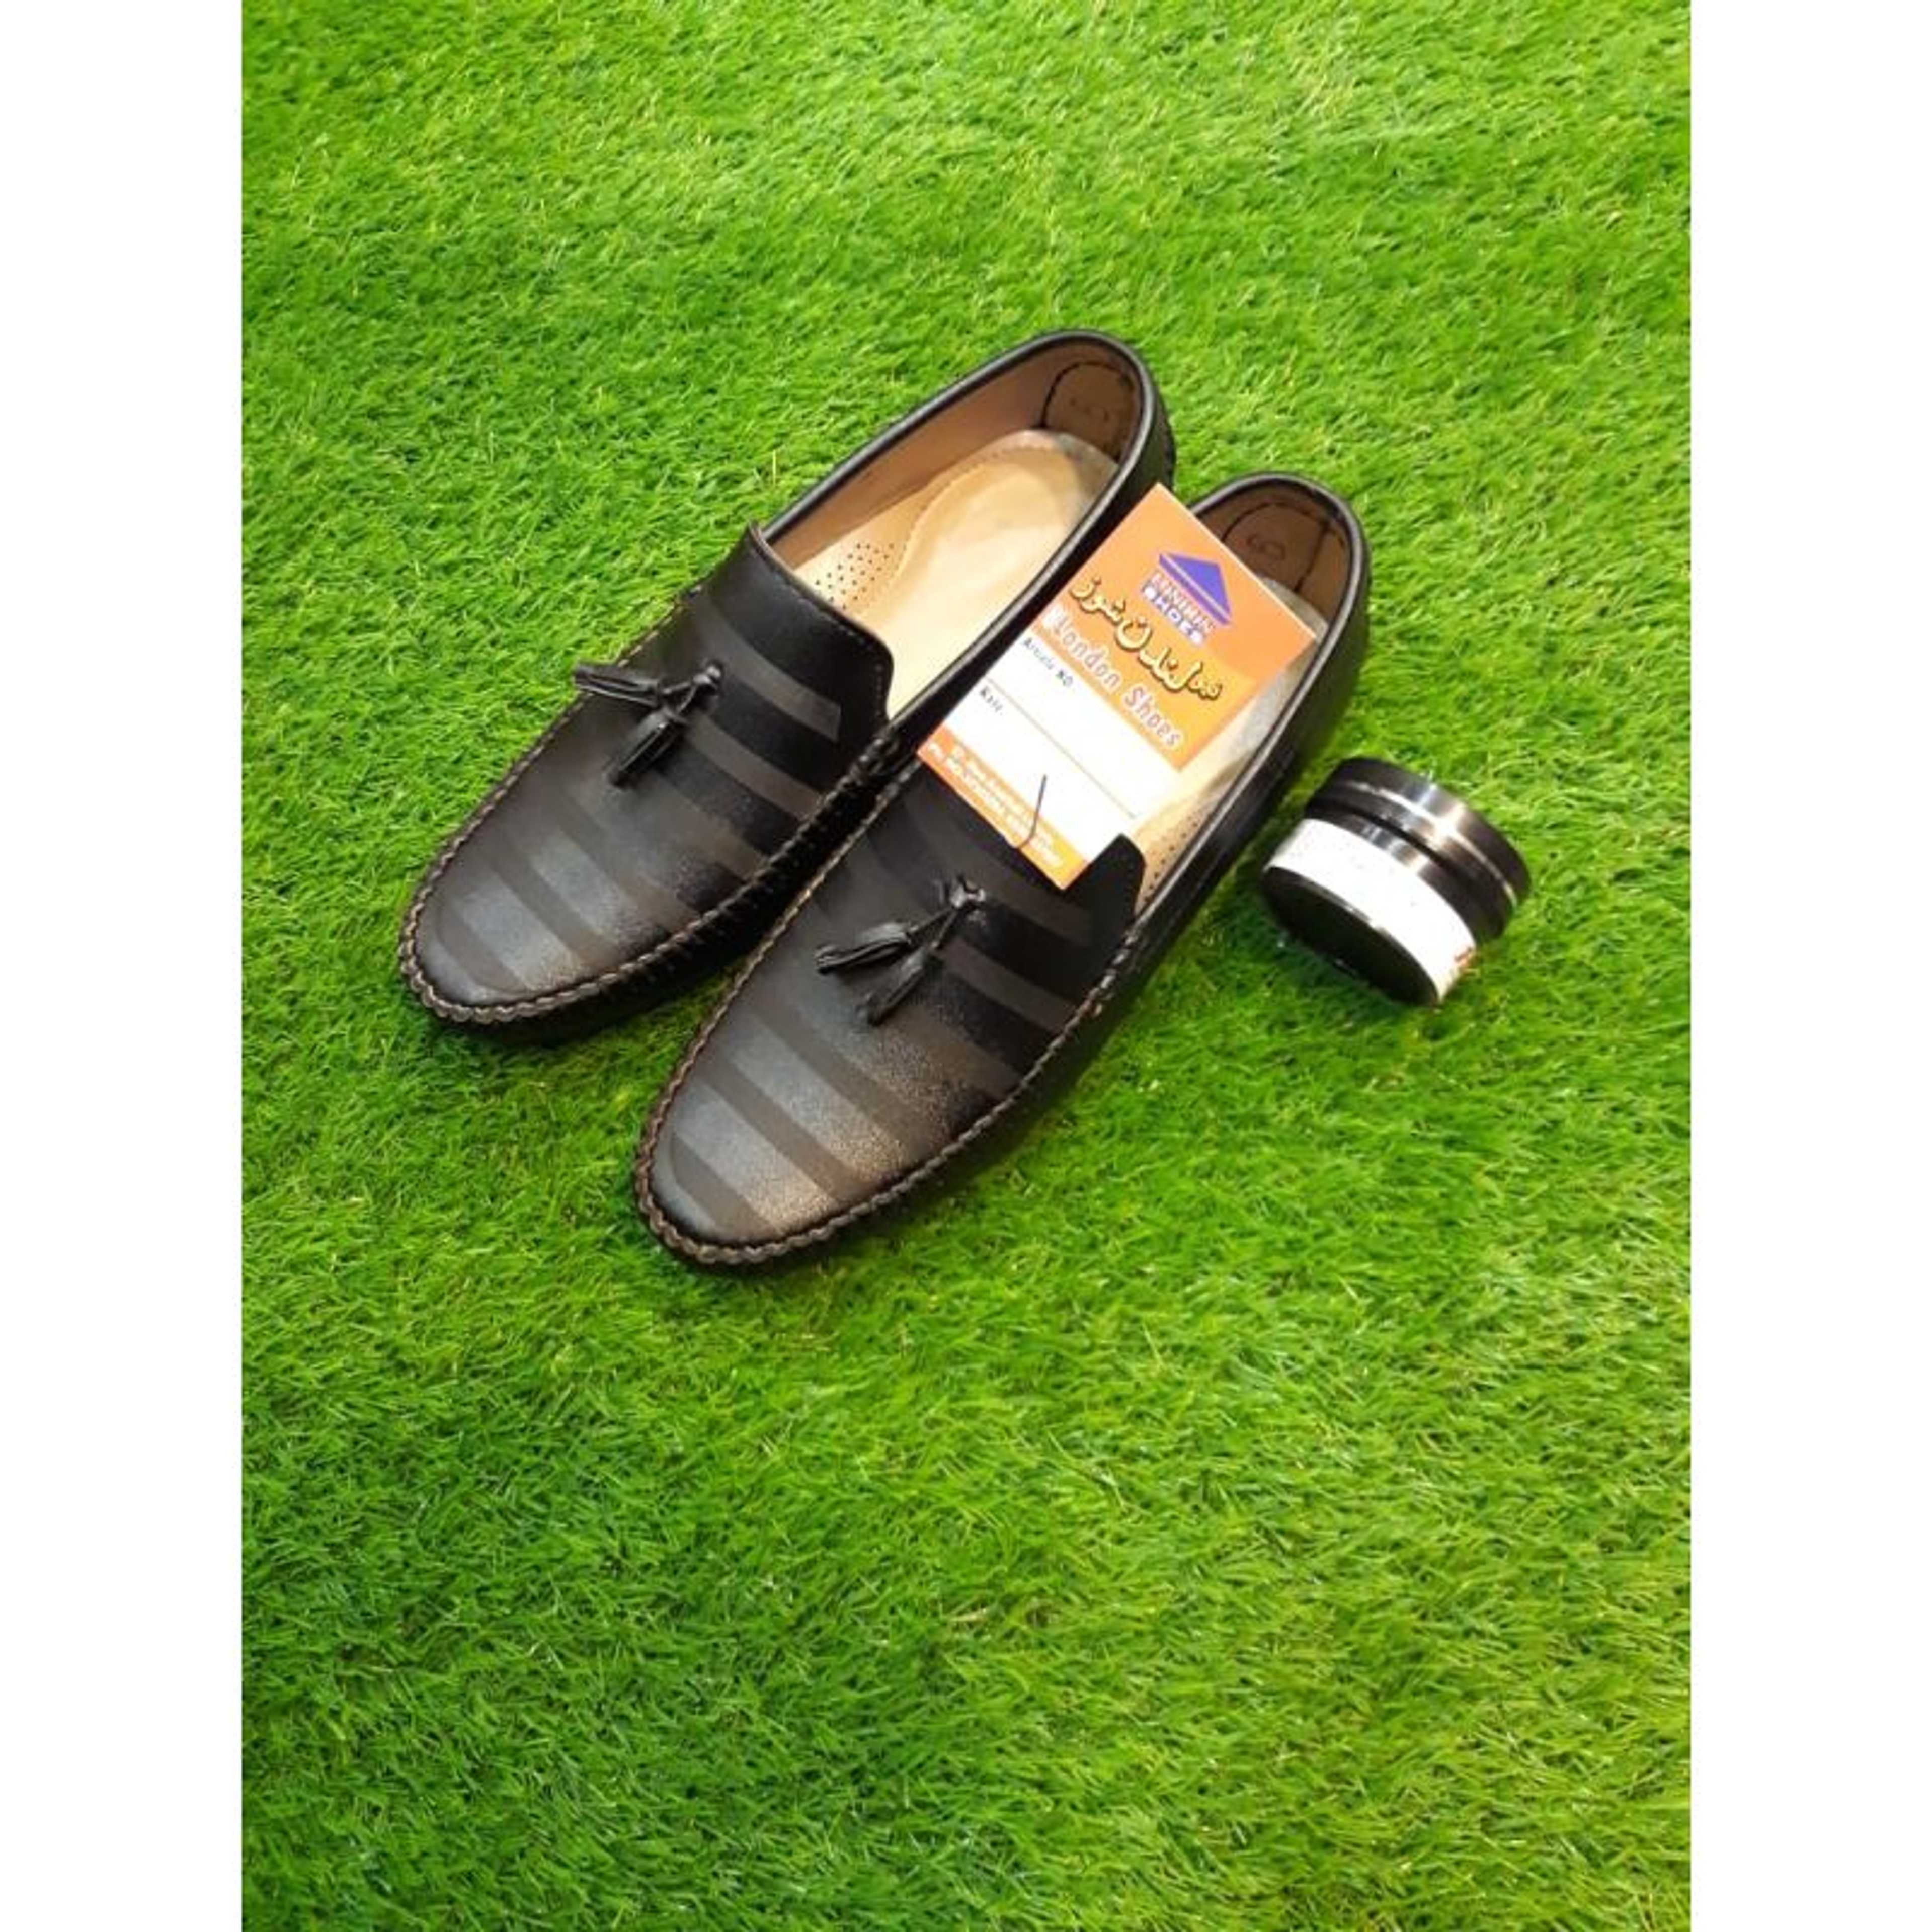 Black Color Loafers Shoes with Design and FREE Polish Gift - Article 1423